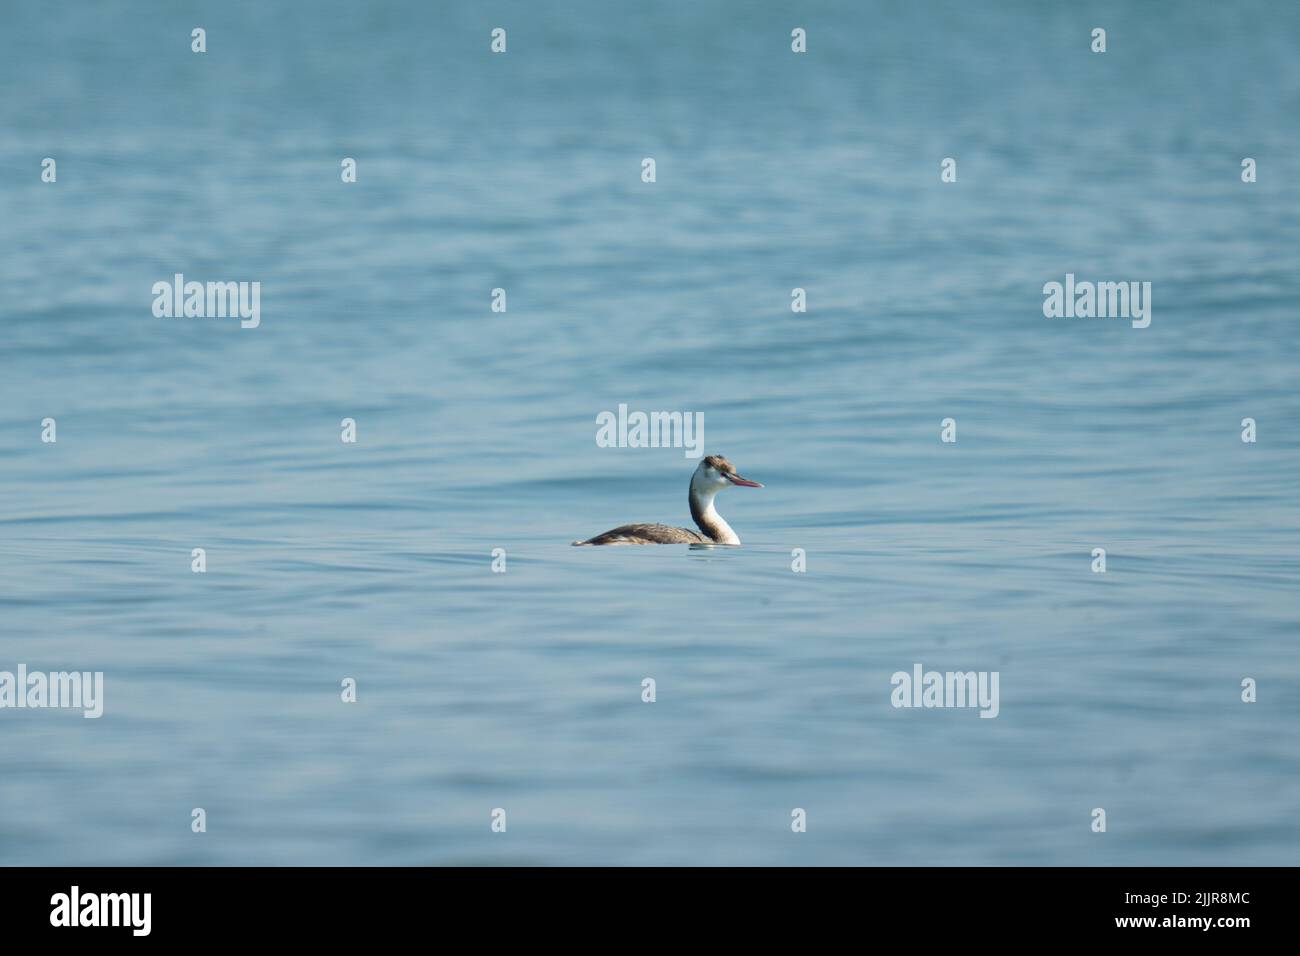 A scenic view of a great crested grebe swimming in the blue ocean Stock Photo